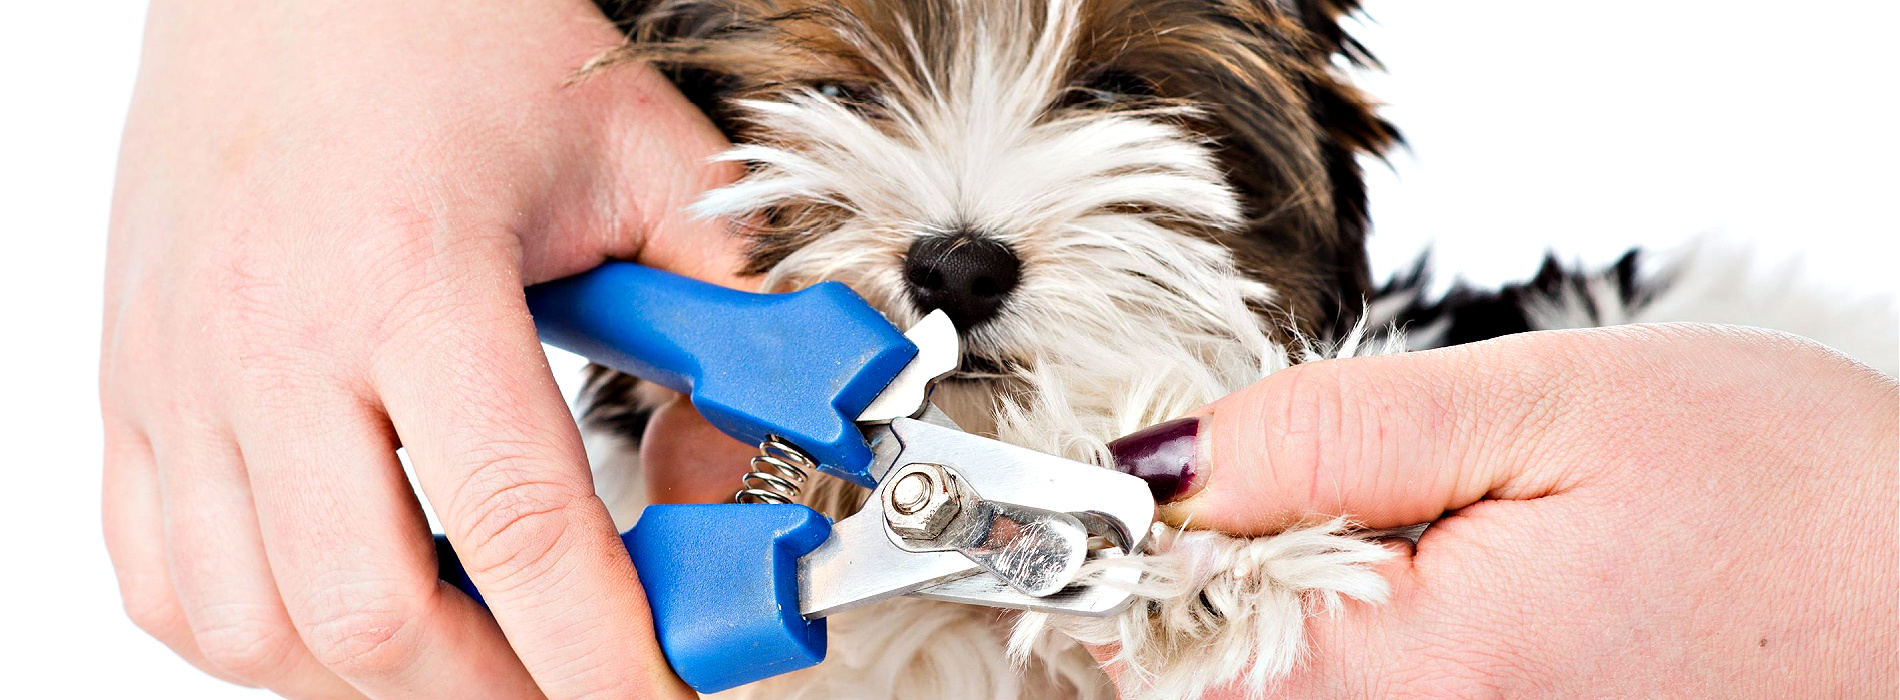 How to Cut Your Dog's Nails: A Step-by-Step Guide - Bully Max